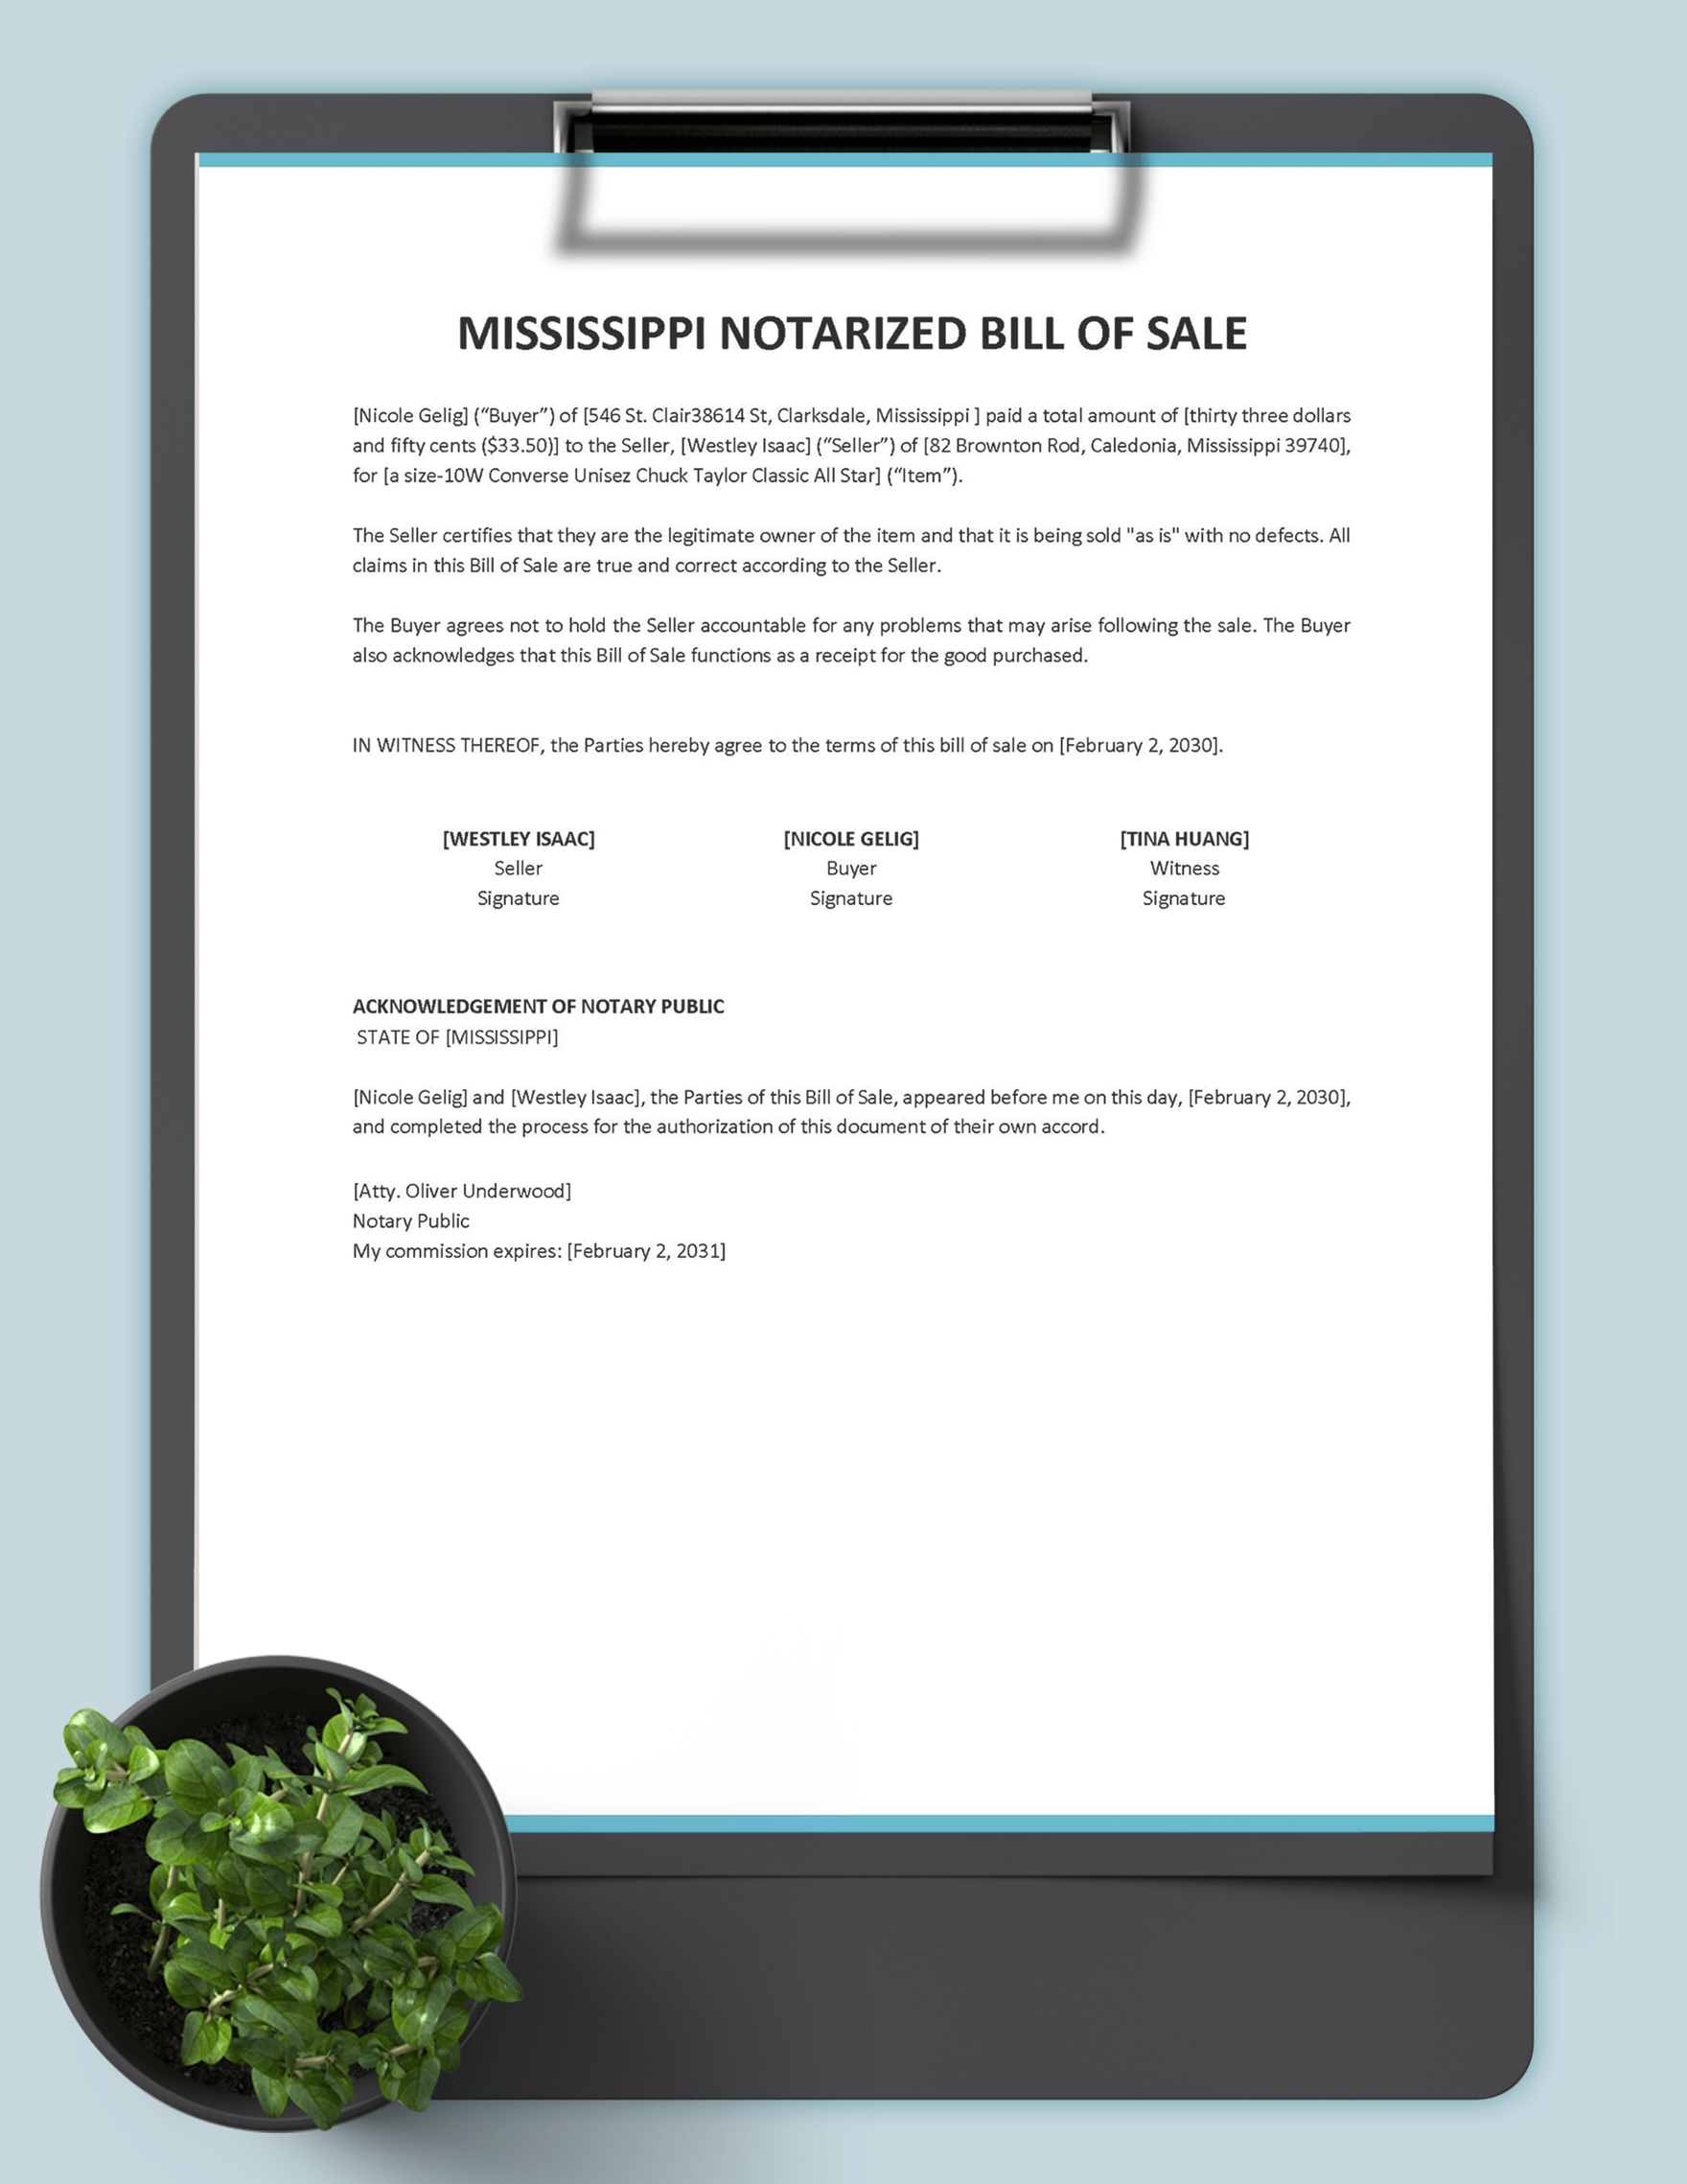 Mississippi Notarized Bill of Sale Template